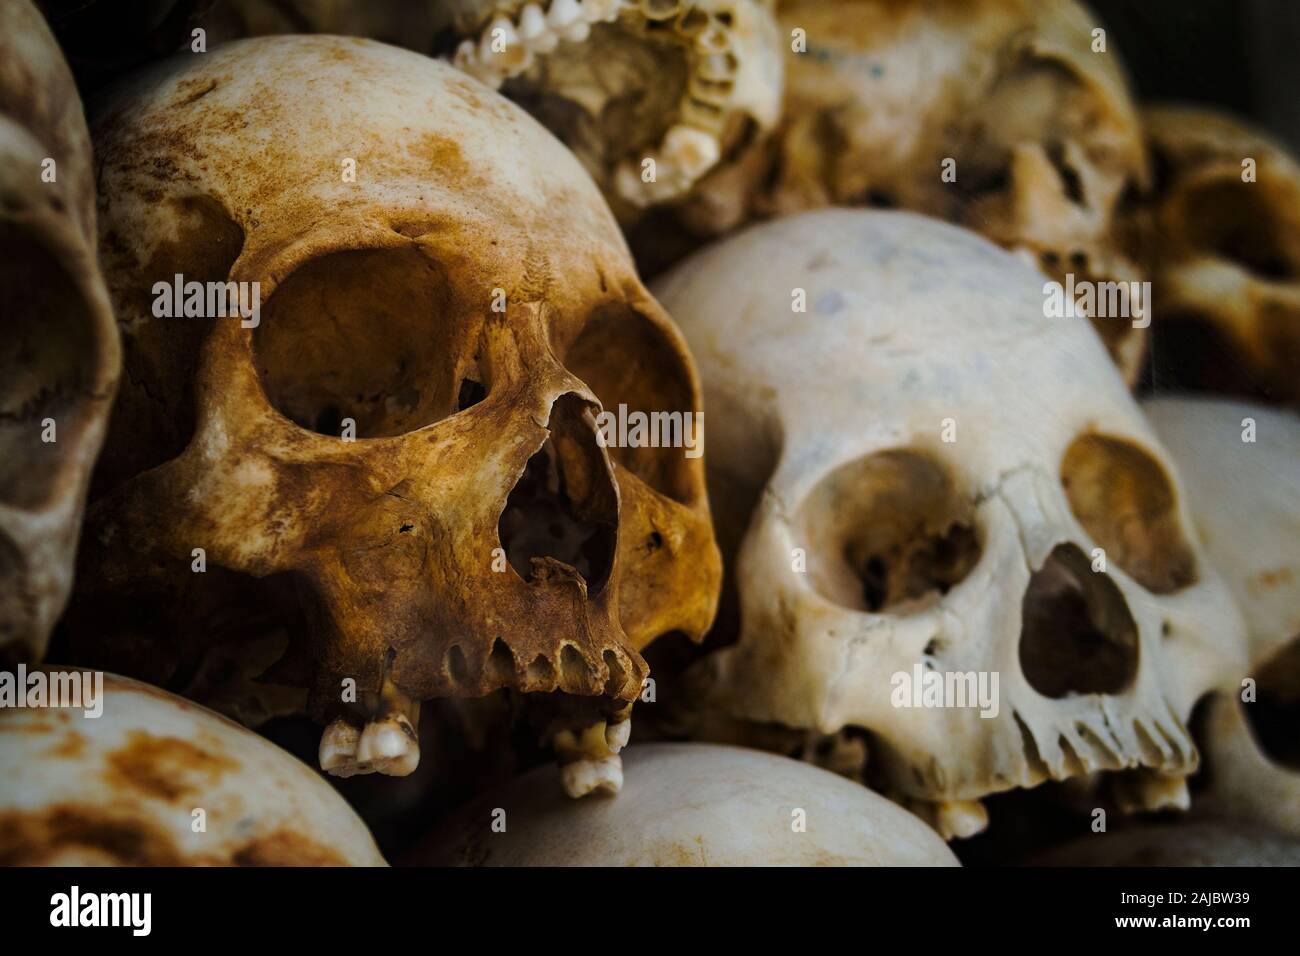 Human skulls of victims of the Khmer Rouge stacked at the Killing Fields of Choeung Ek memorial in Phnom Penh, Cambodia. Stock Photo